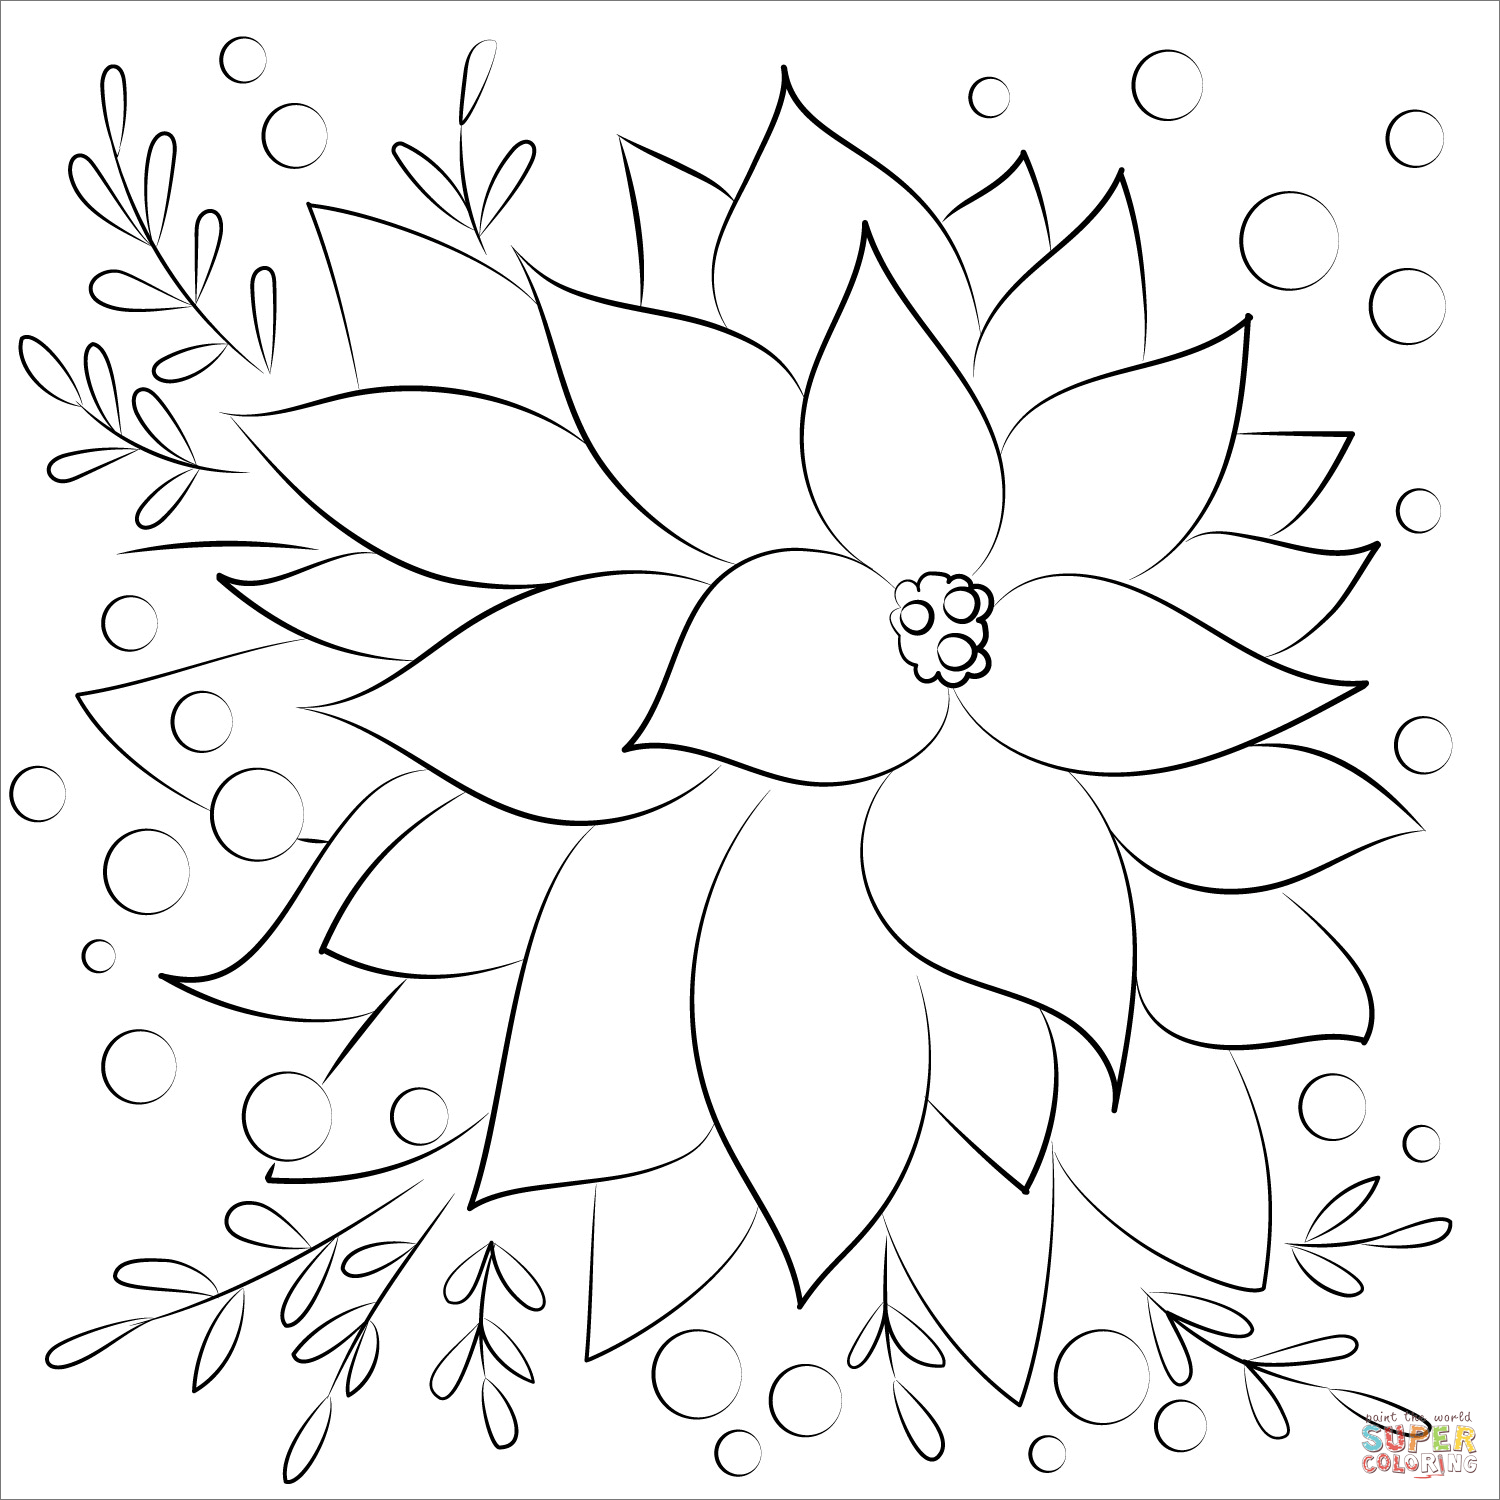 Poinsettia white Coloring Page